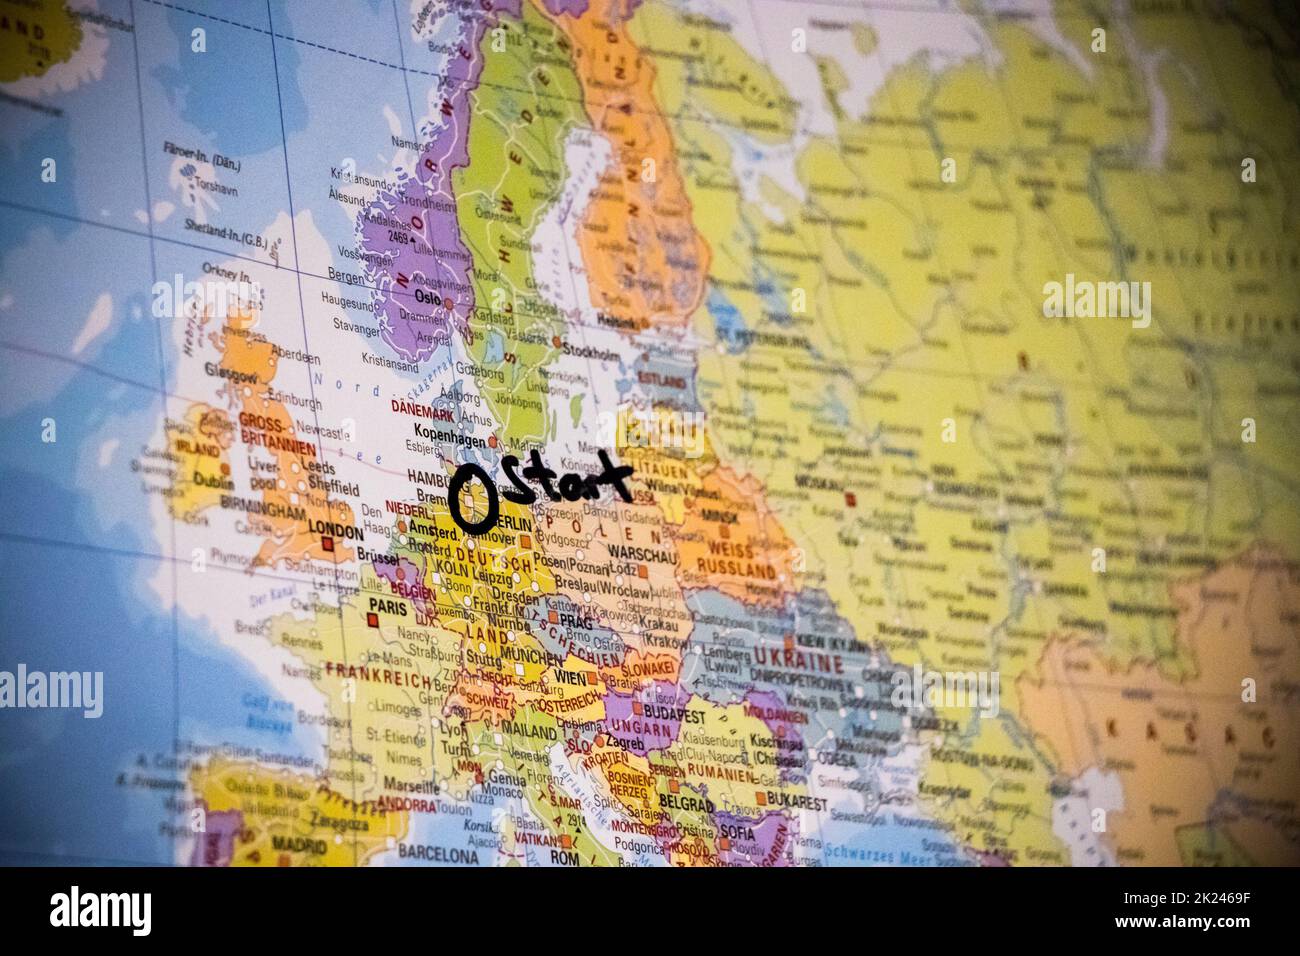 Start a world trip and plan your route on the world map. Select route from Europe via Africa to Asia. Stock Photo